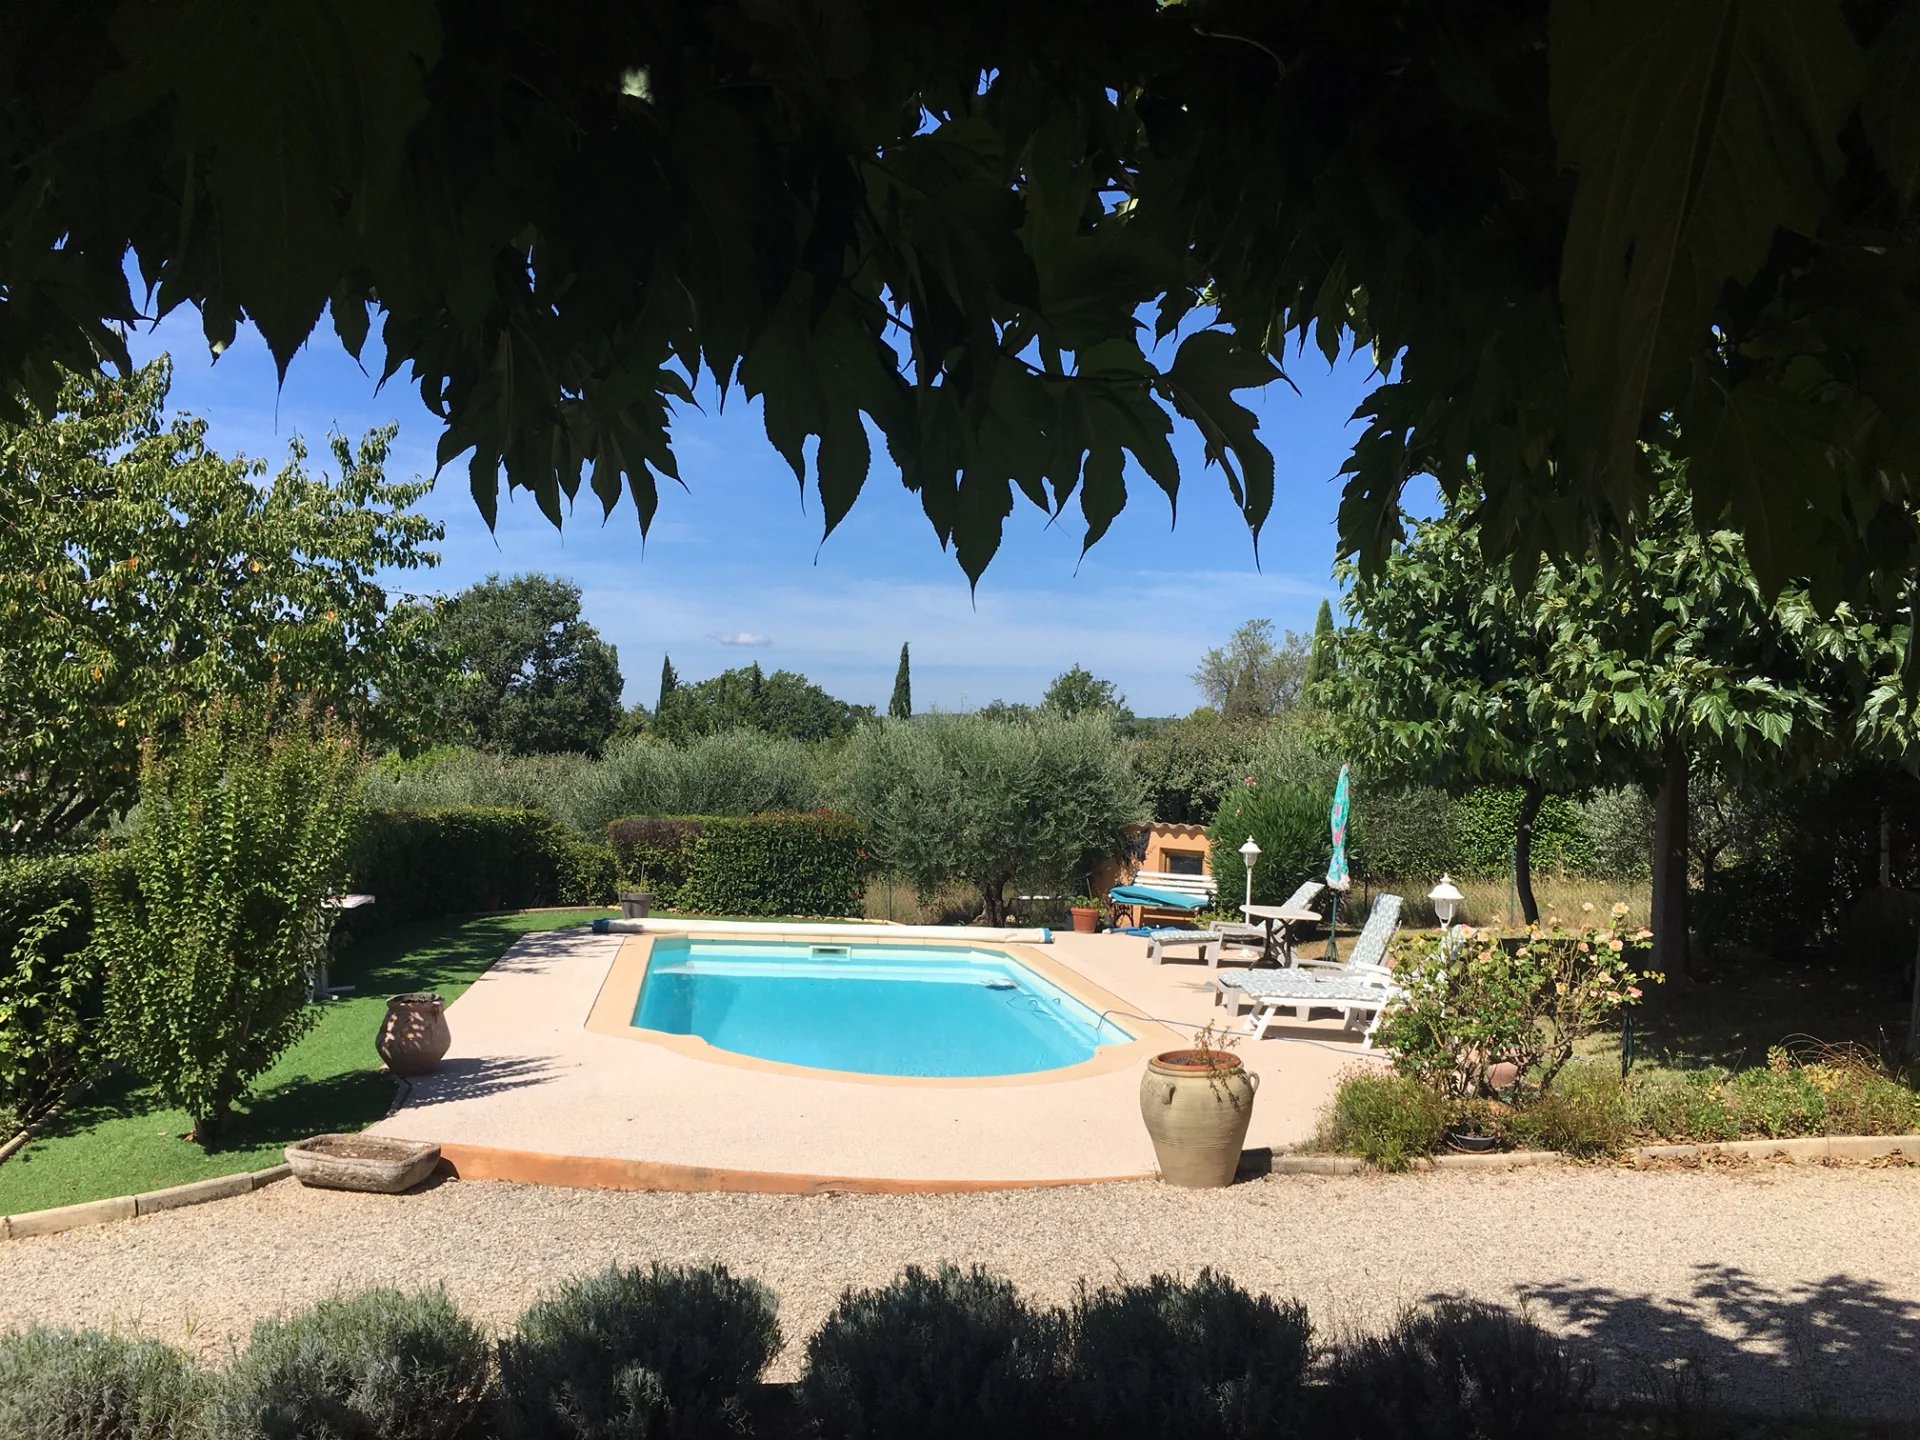 PROVENCALE STYLE VILLA AMONG OLIVE GROVES